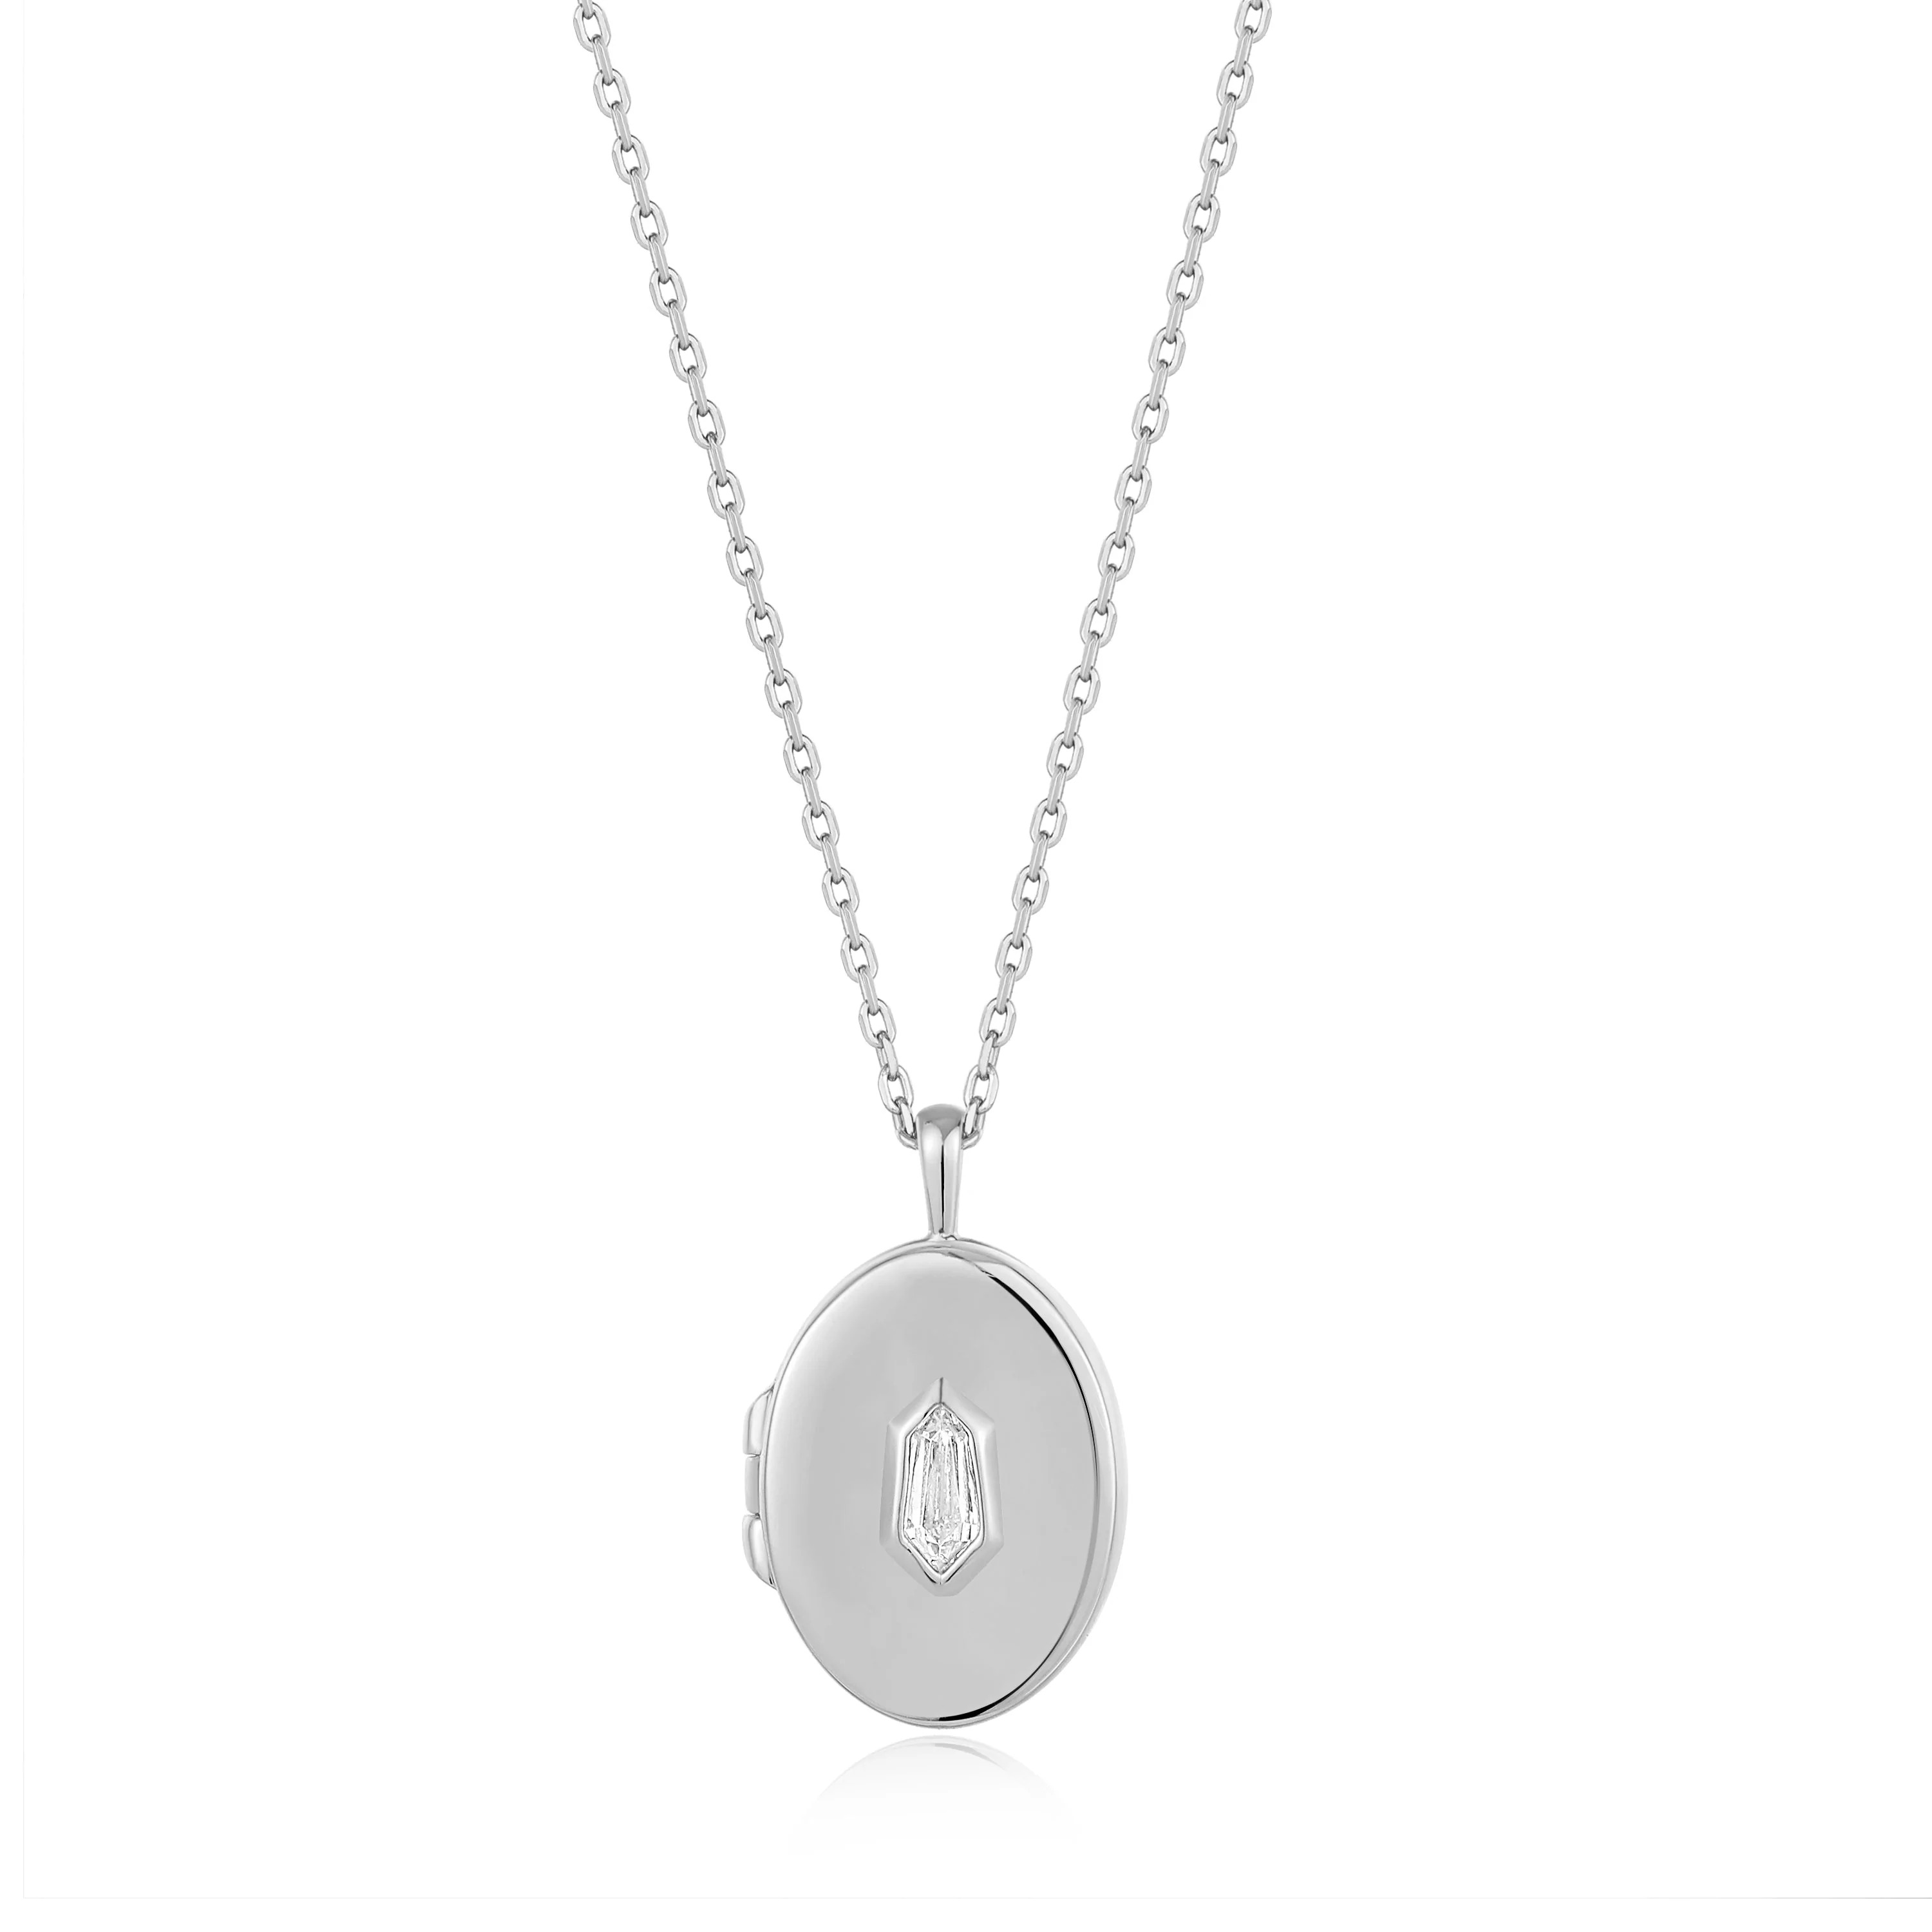 ANIA HAIE Silver Locket Pendant Necklace